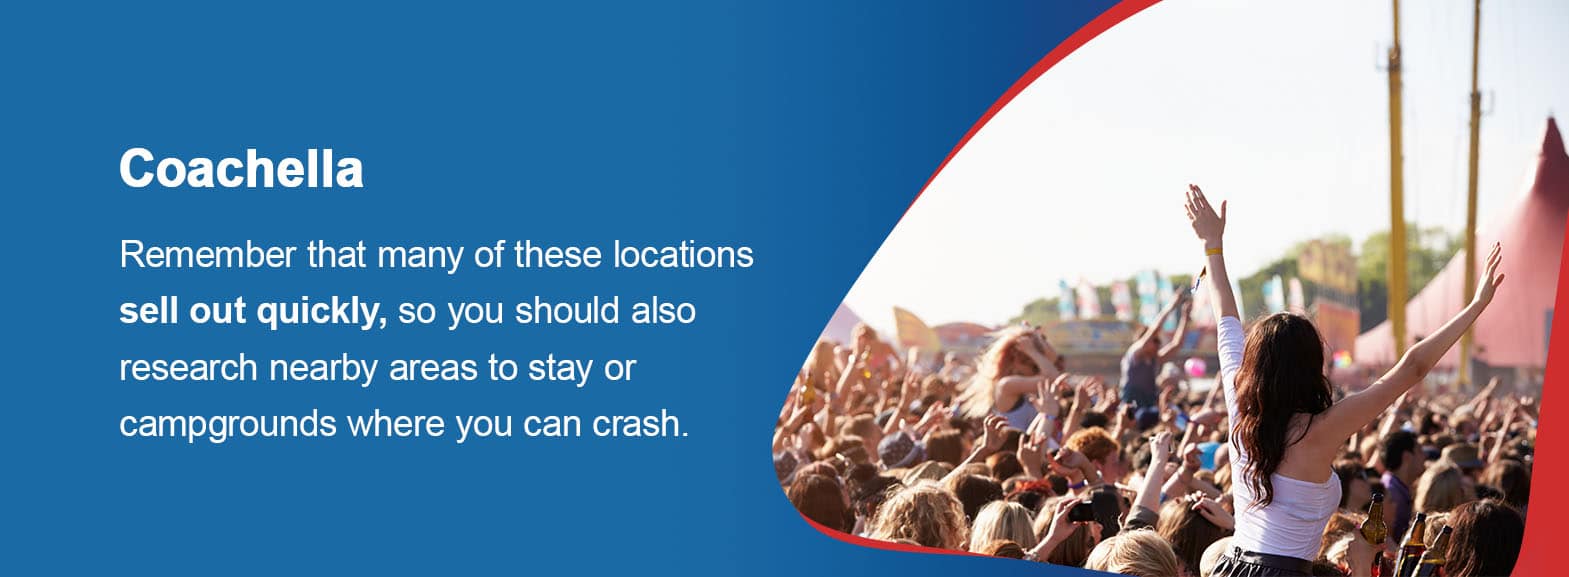 Coachella. Remember that many of these locations sell out quickly, so you should also research nearby areas to stay or campgrounds where you can crash.